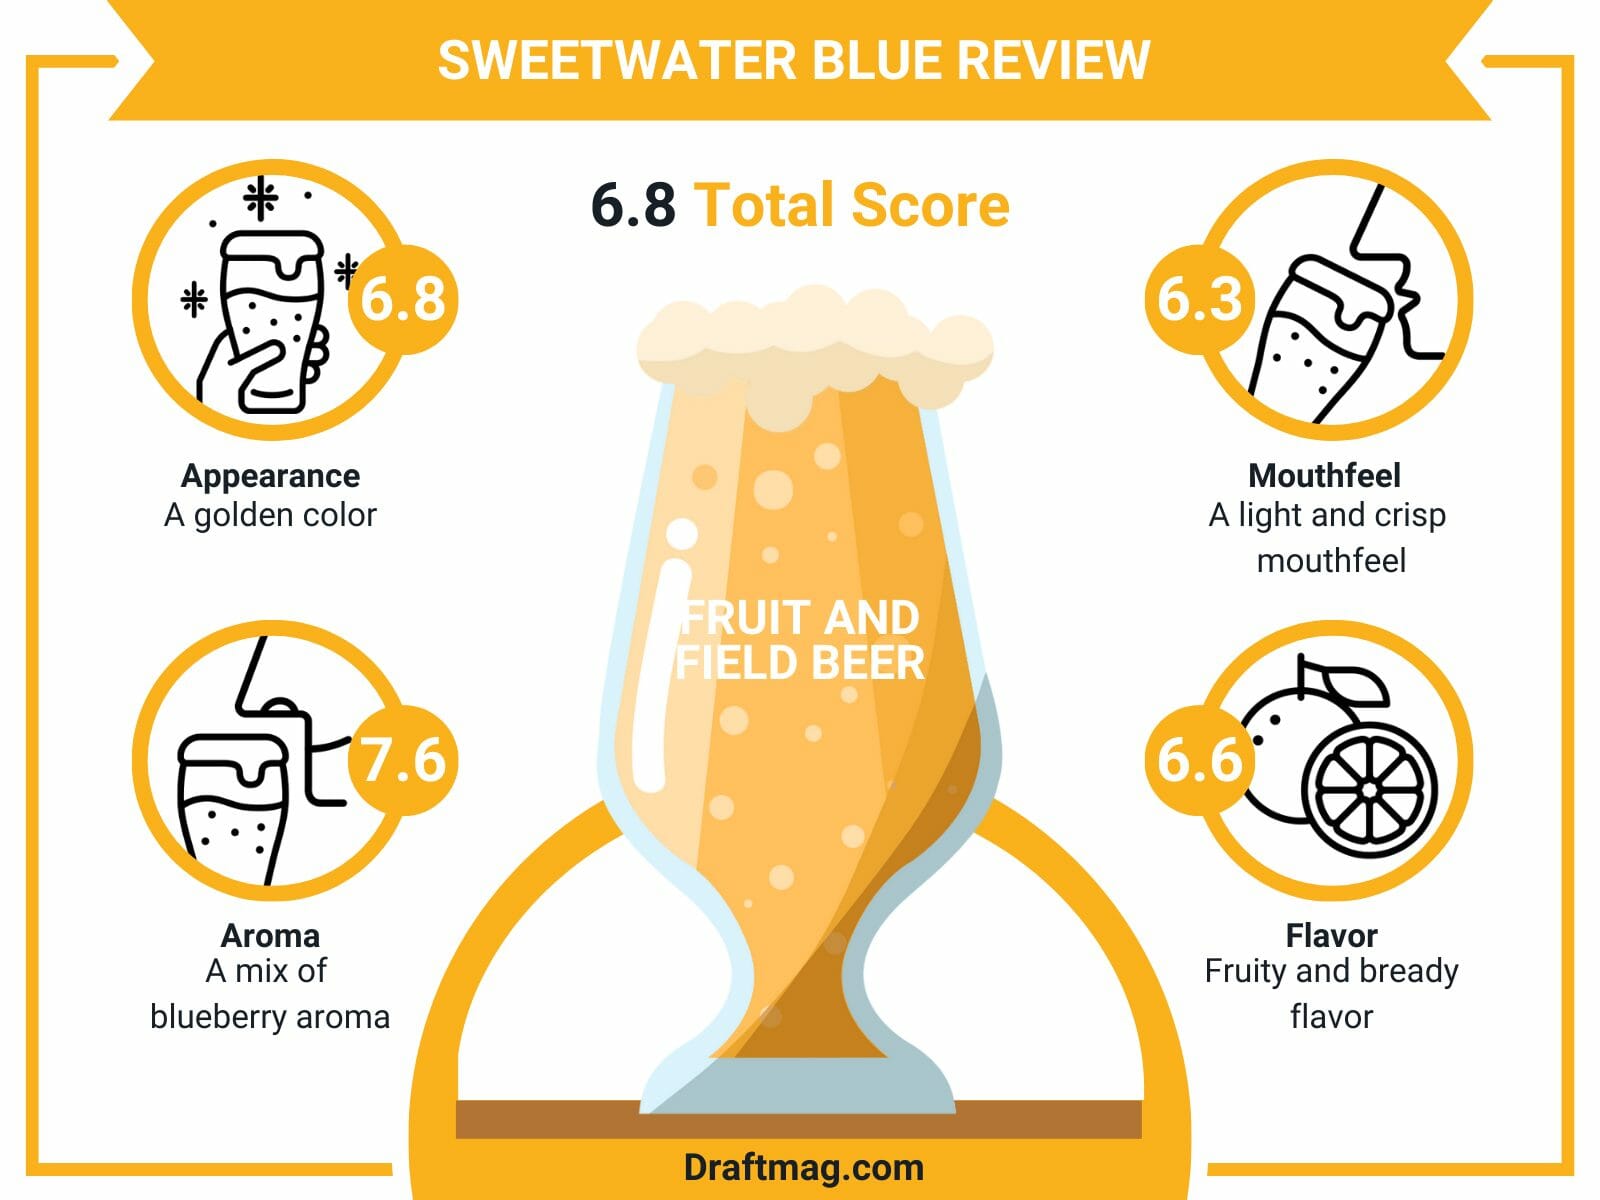 Sweetwater blue review infographic